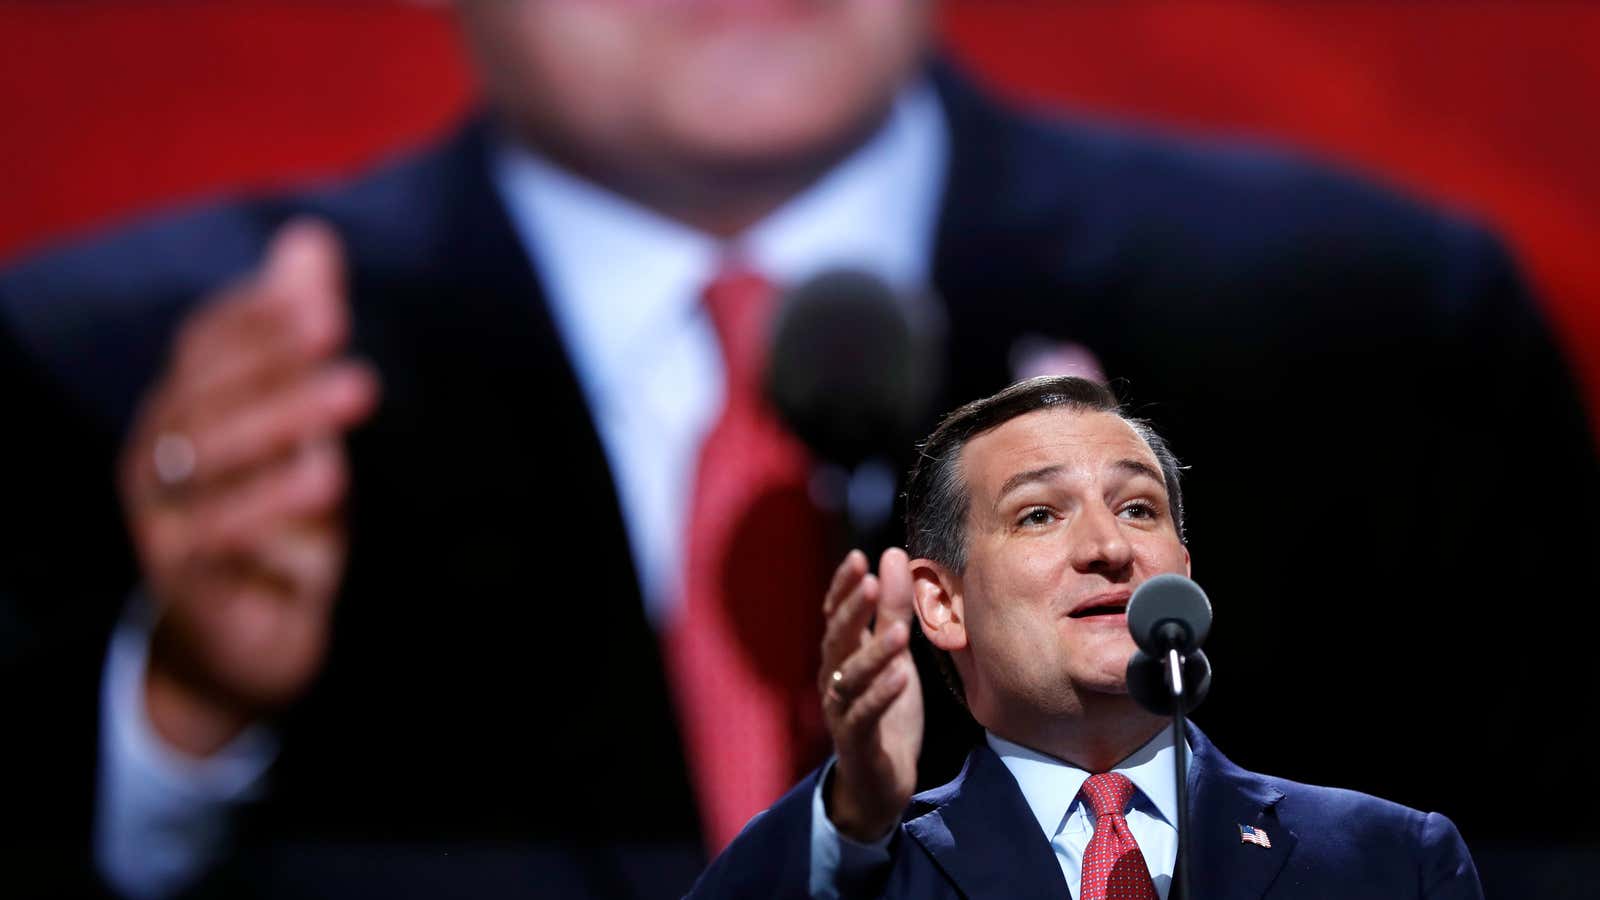 Ted Cruz will cast a vote for Donald Trump in November.